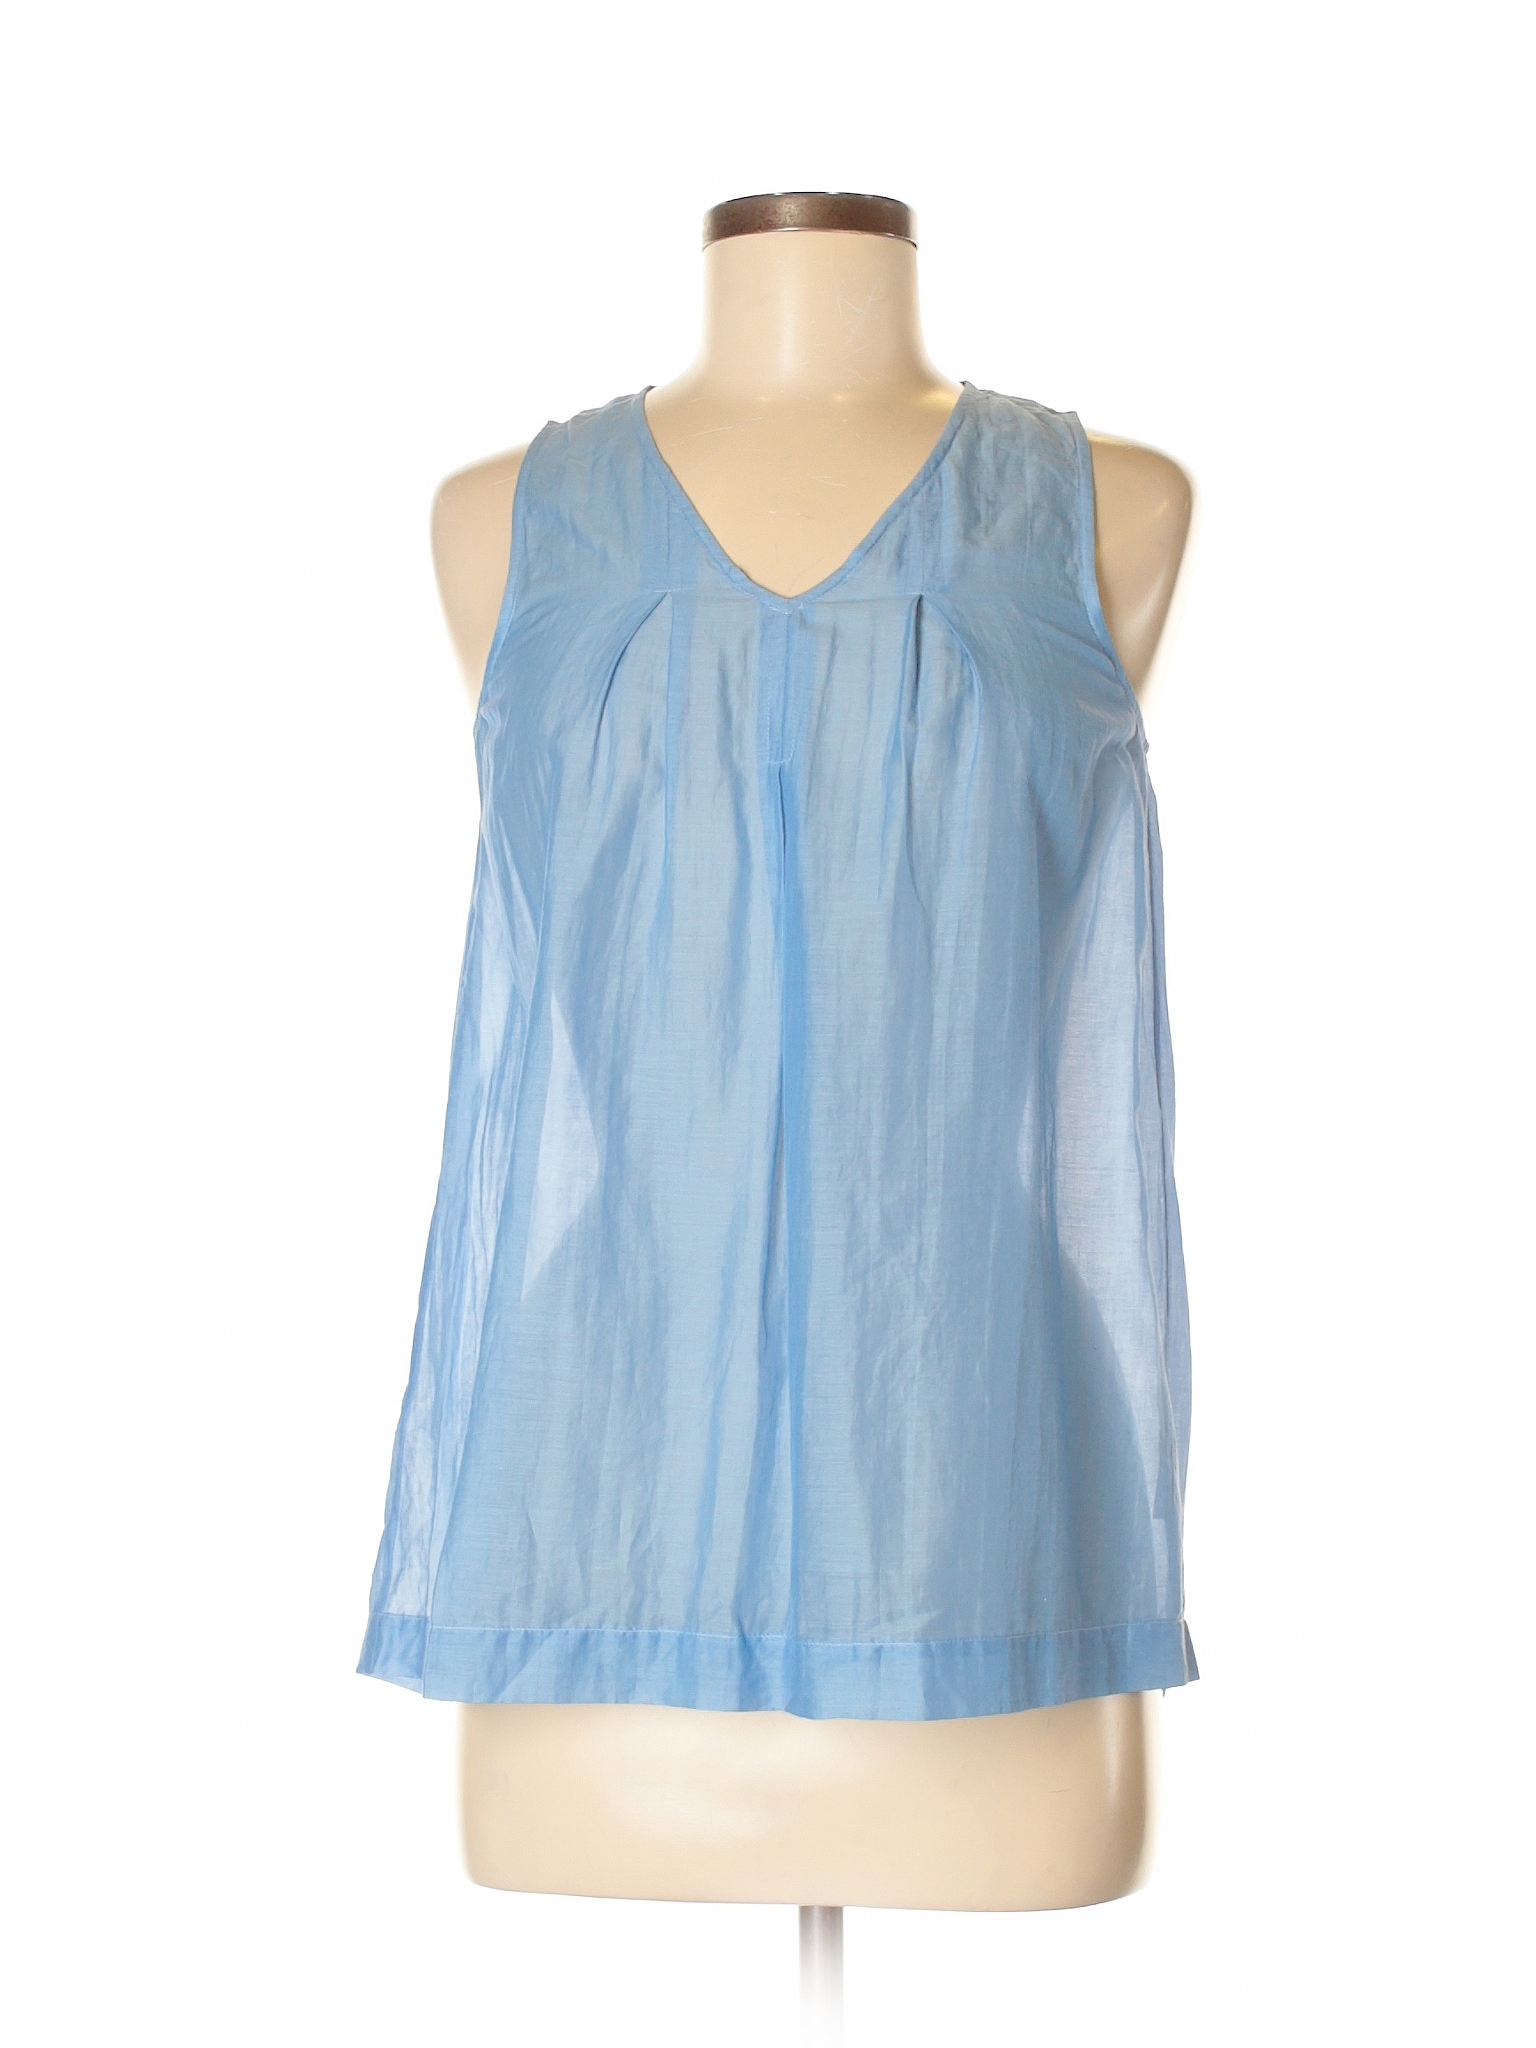 Madewell Solid Blue Sleeveless Blouse Size 6 - 77% off | thredUP